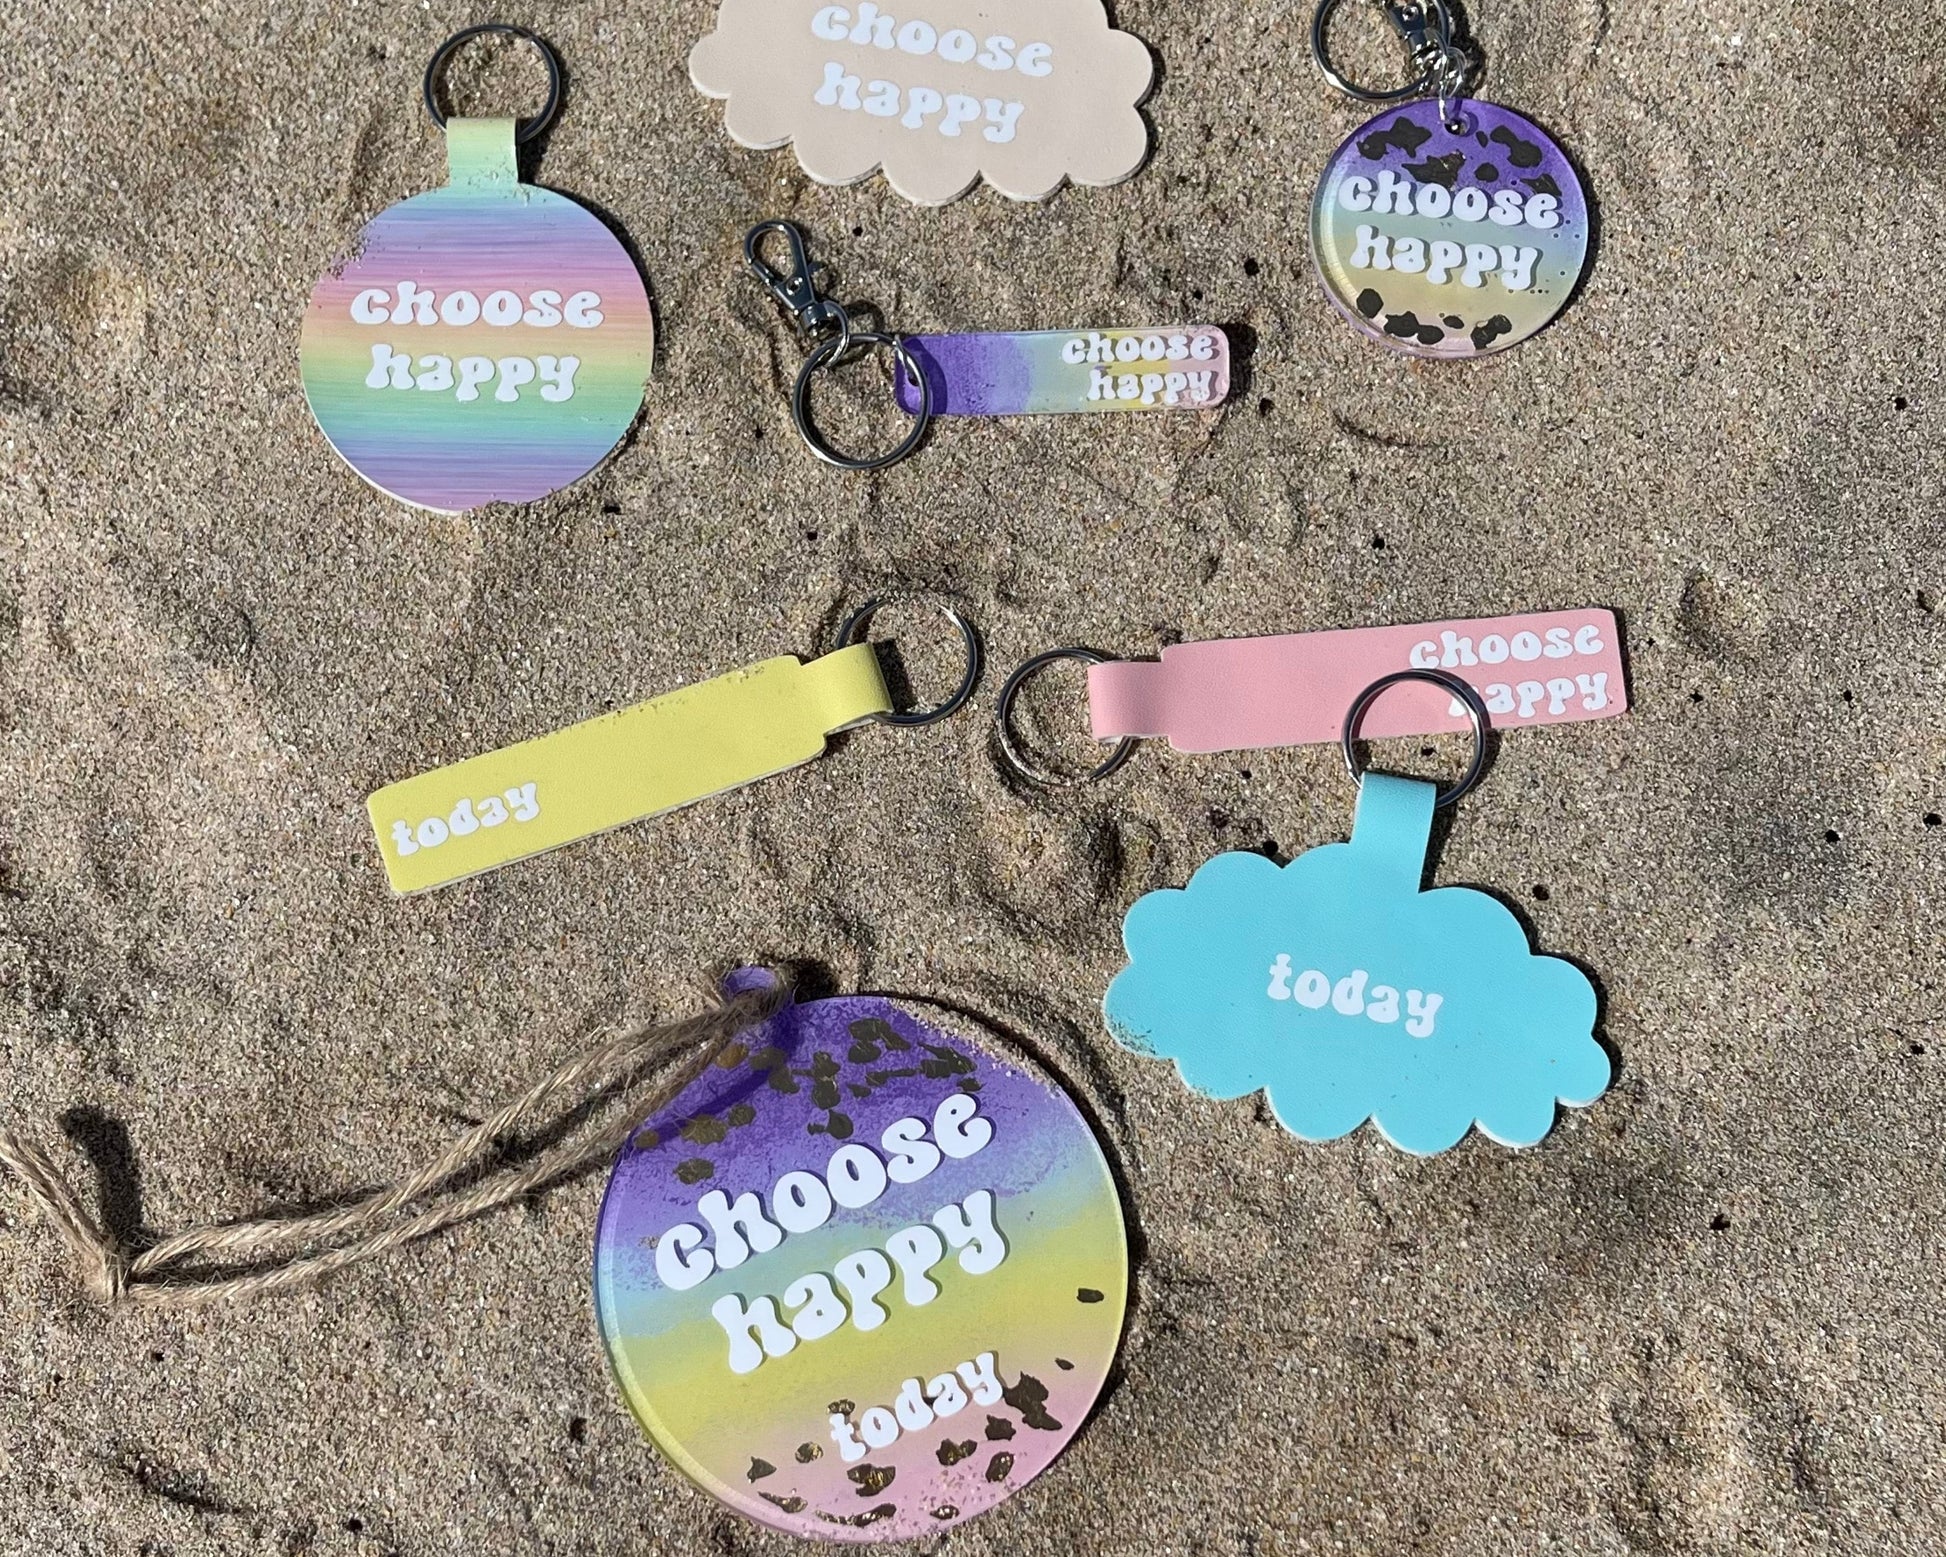 Custom Choose Happy Today Motivational Keyrings in Pastel Faux Leather, Light Weight Keychain Accessory, Self Care Inspirational Quotes